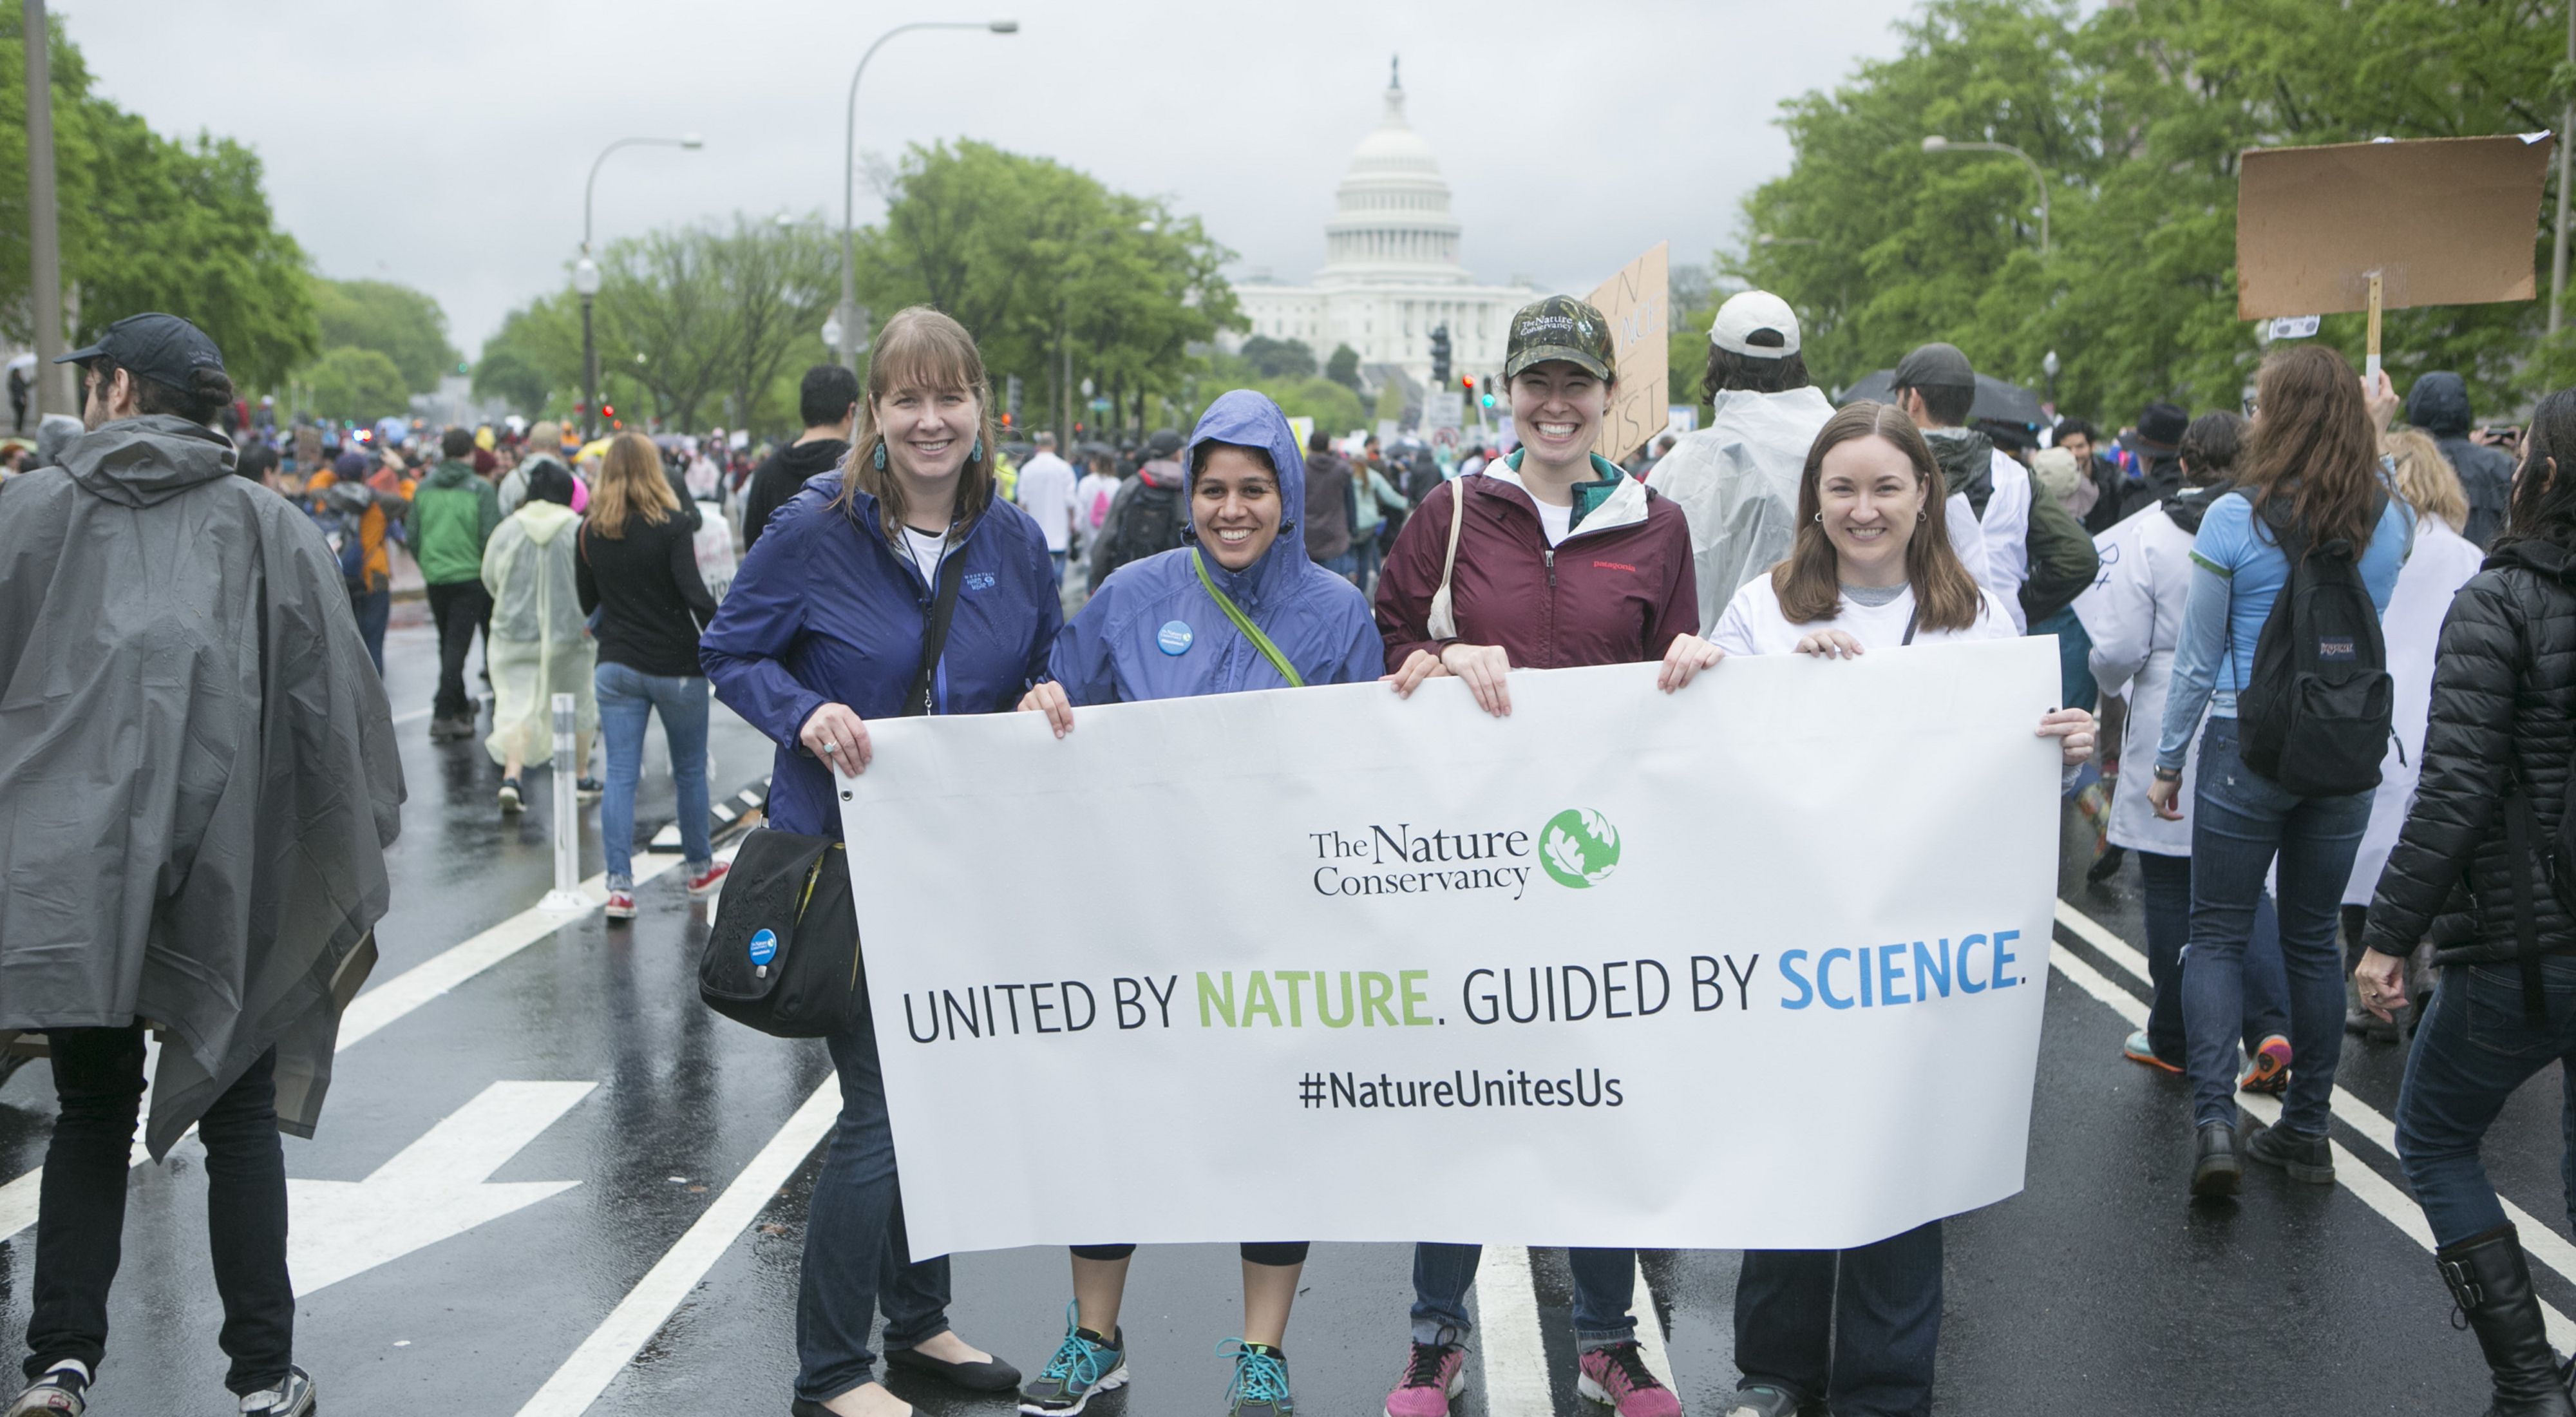 The Nature Conservancy participates in the Earth Day March for Science on the National Mall in Washington, DC, April 22, 2017.